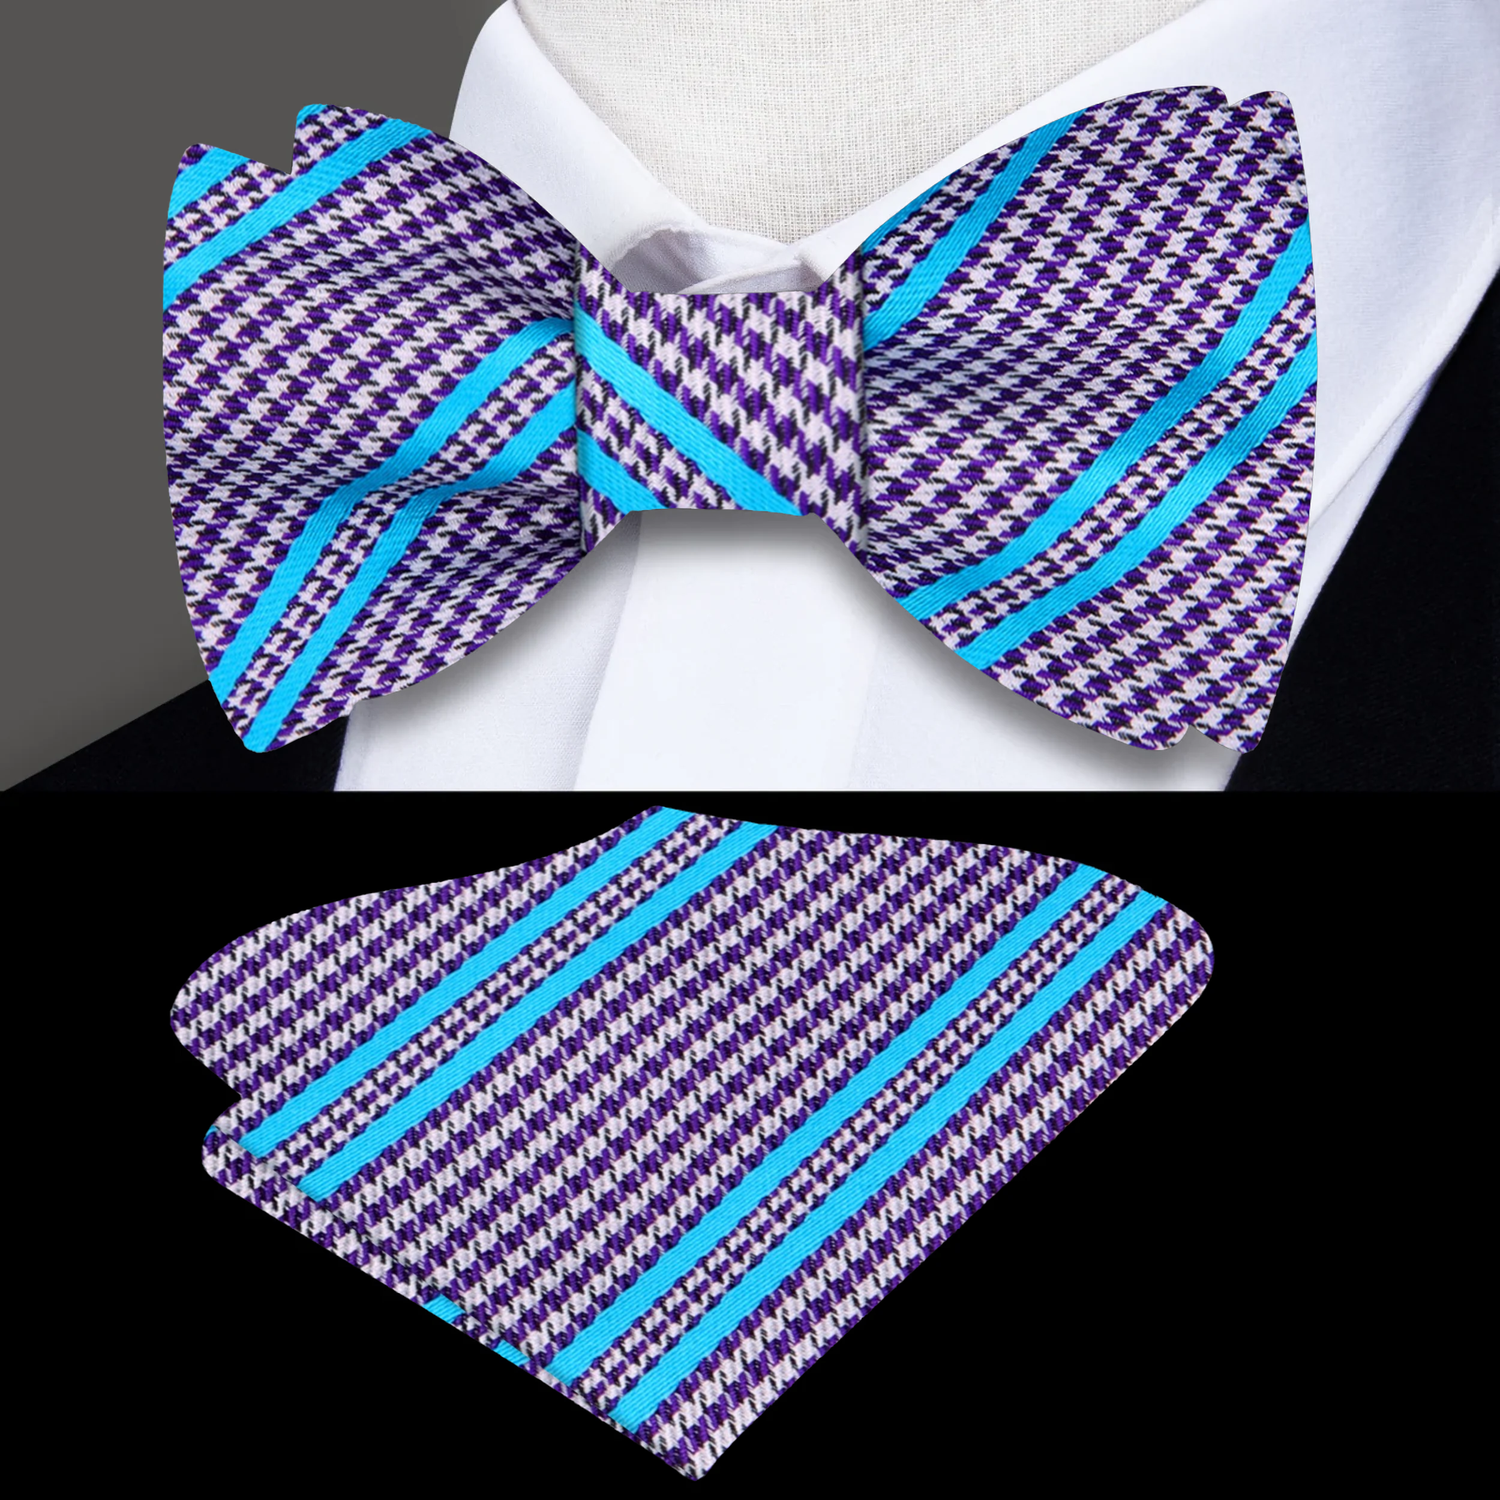 A Grape, Blue Houndstooth with Stripe Pattern Silk Self Tie Bow Tie, Matching Pocket Square